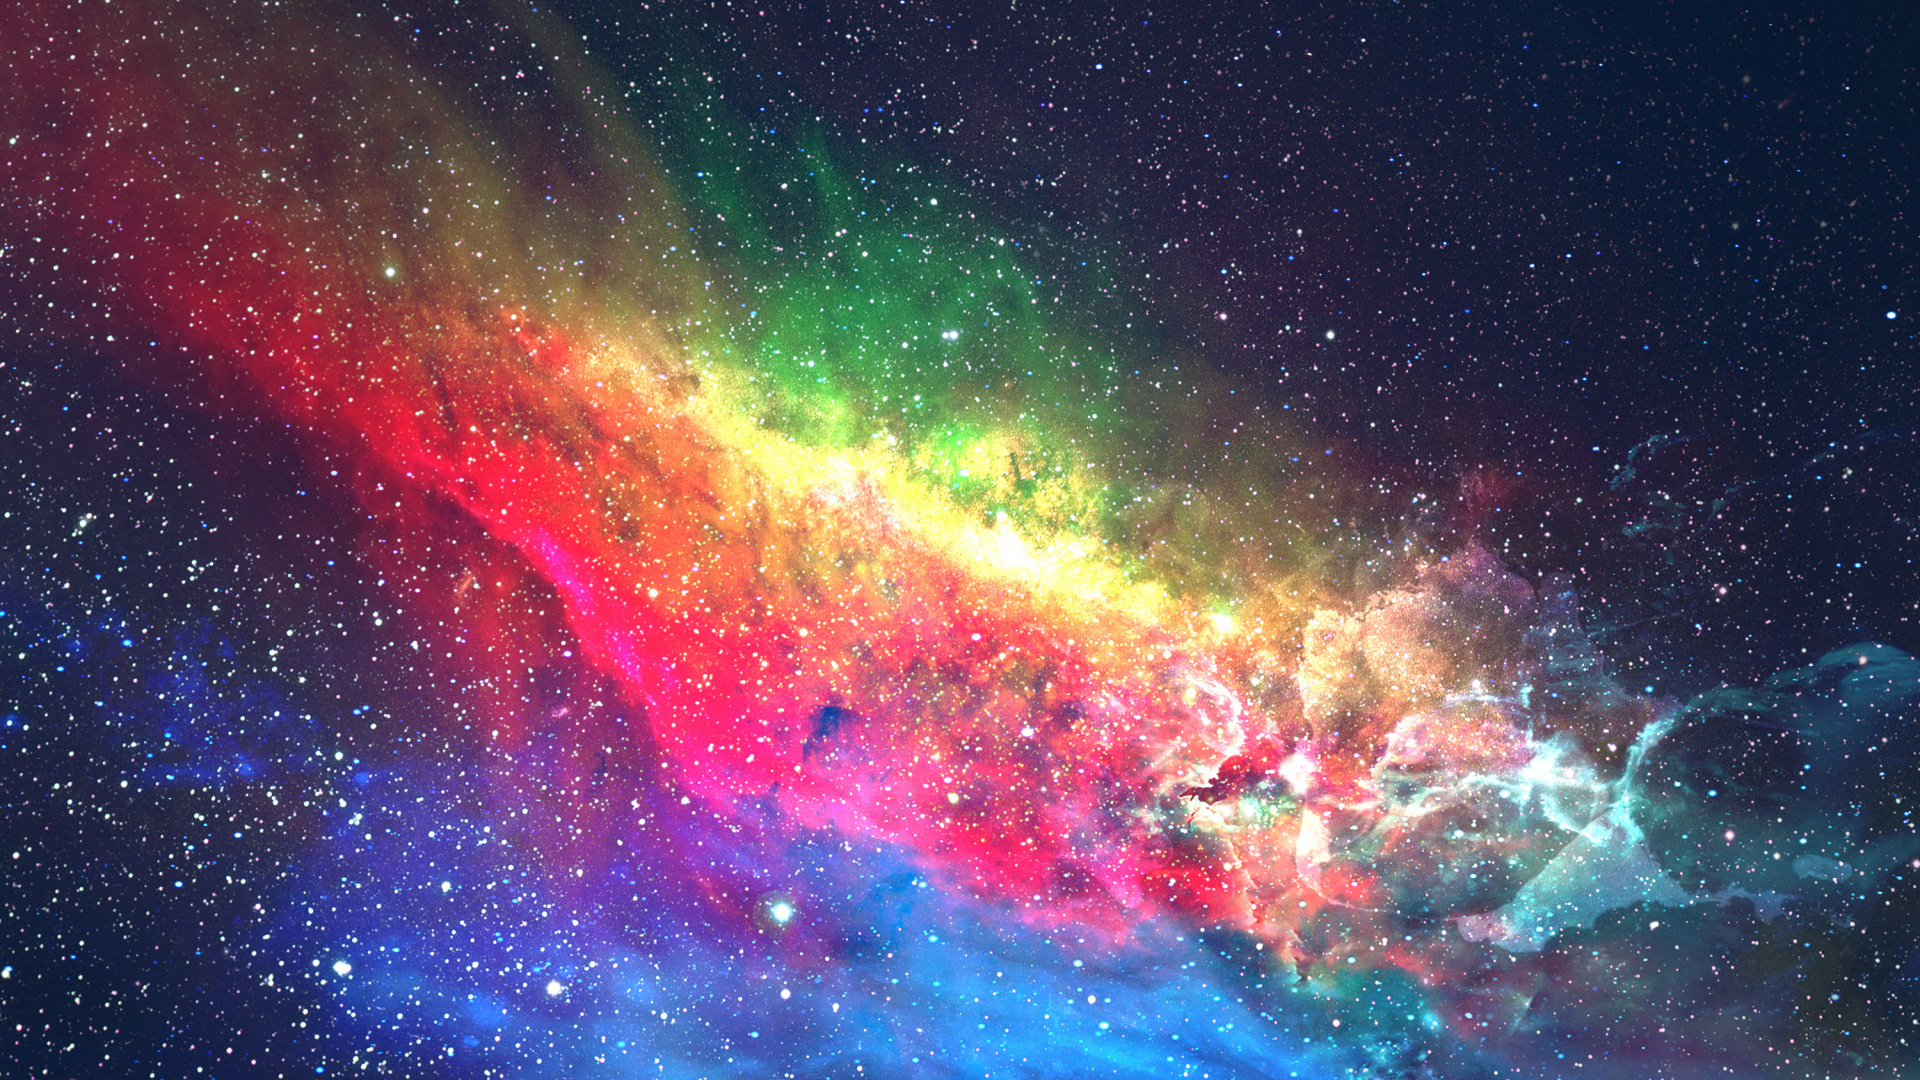 Space Galaxy Wallpaper HD:Amazon.co.uk:Appstore for Android